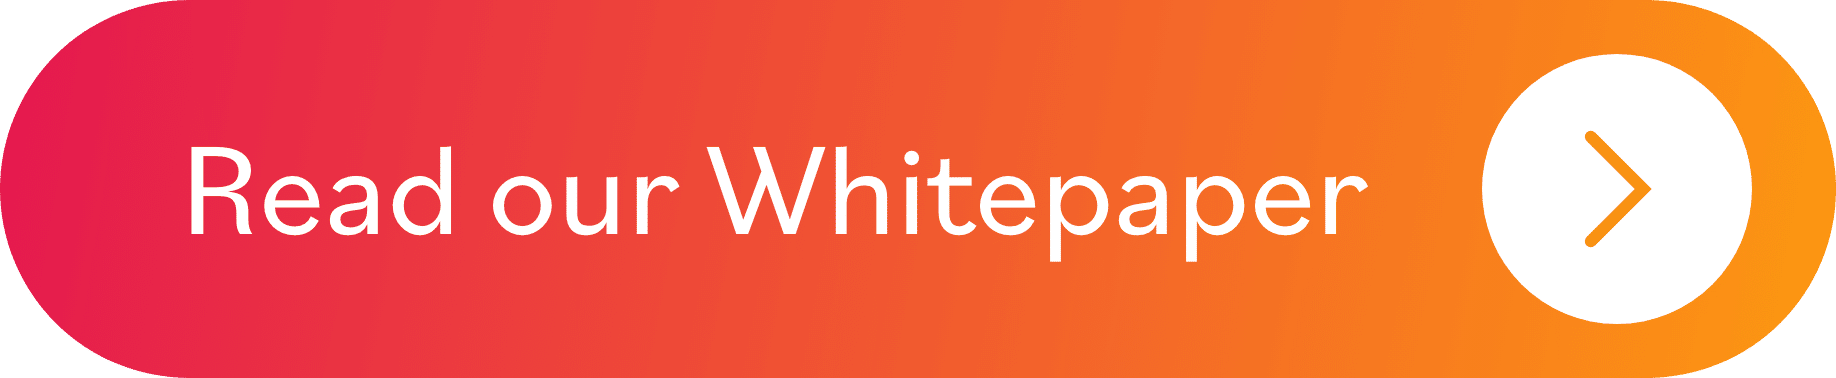 Read our Whitepaper